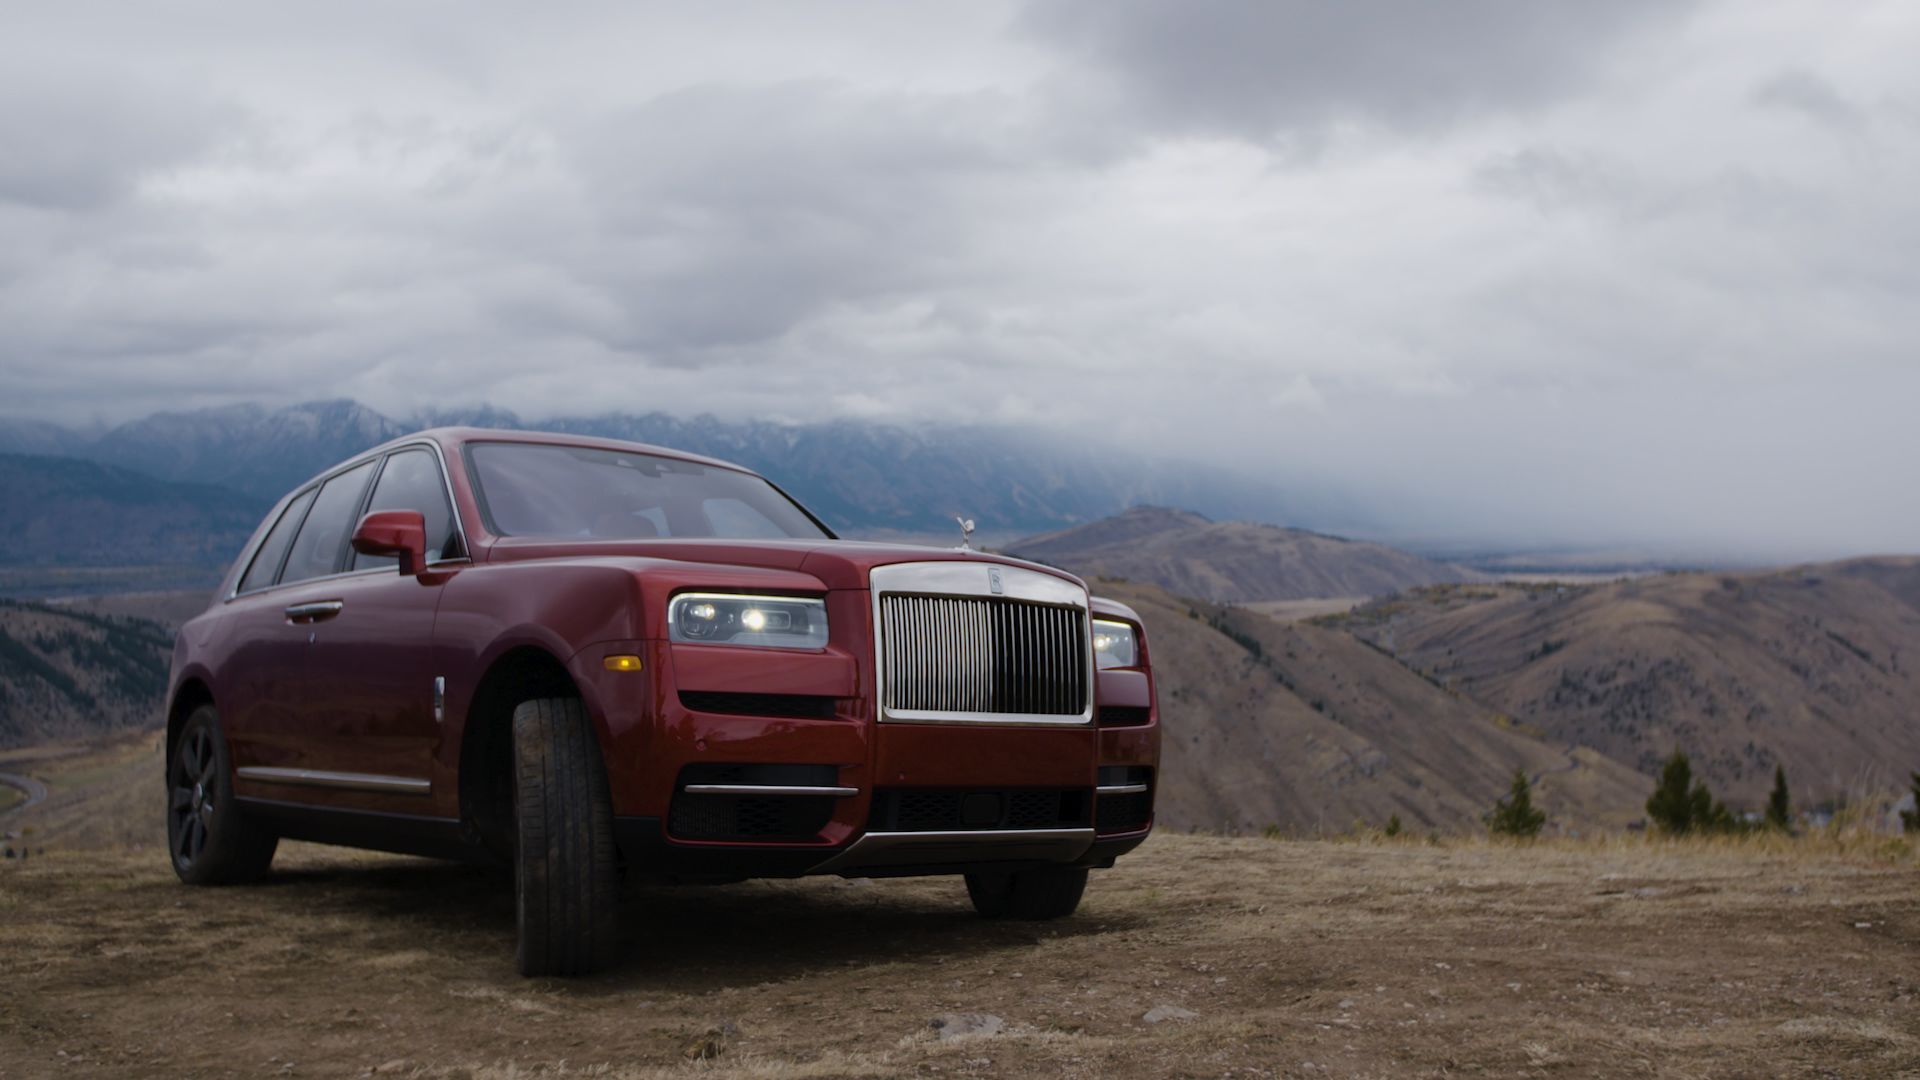 The Rolls-Royce Cullinan SUV Is Massive—and Will Not Be Ignored - WSJ